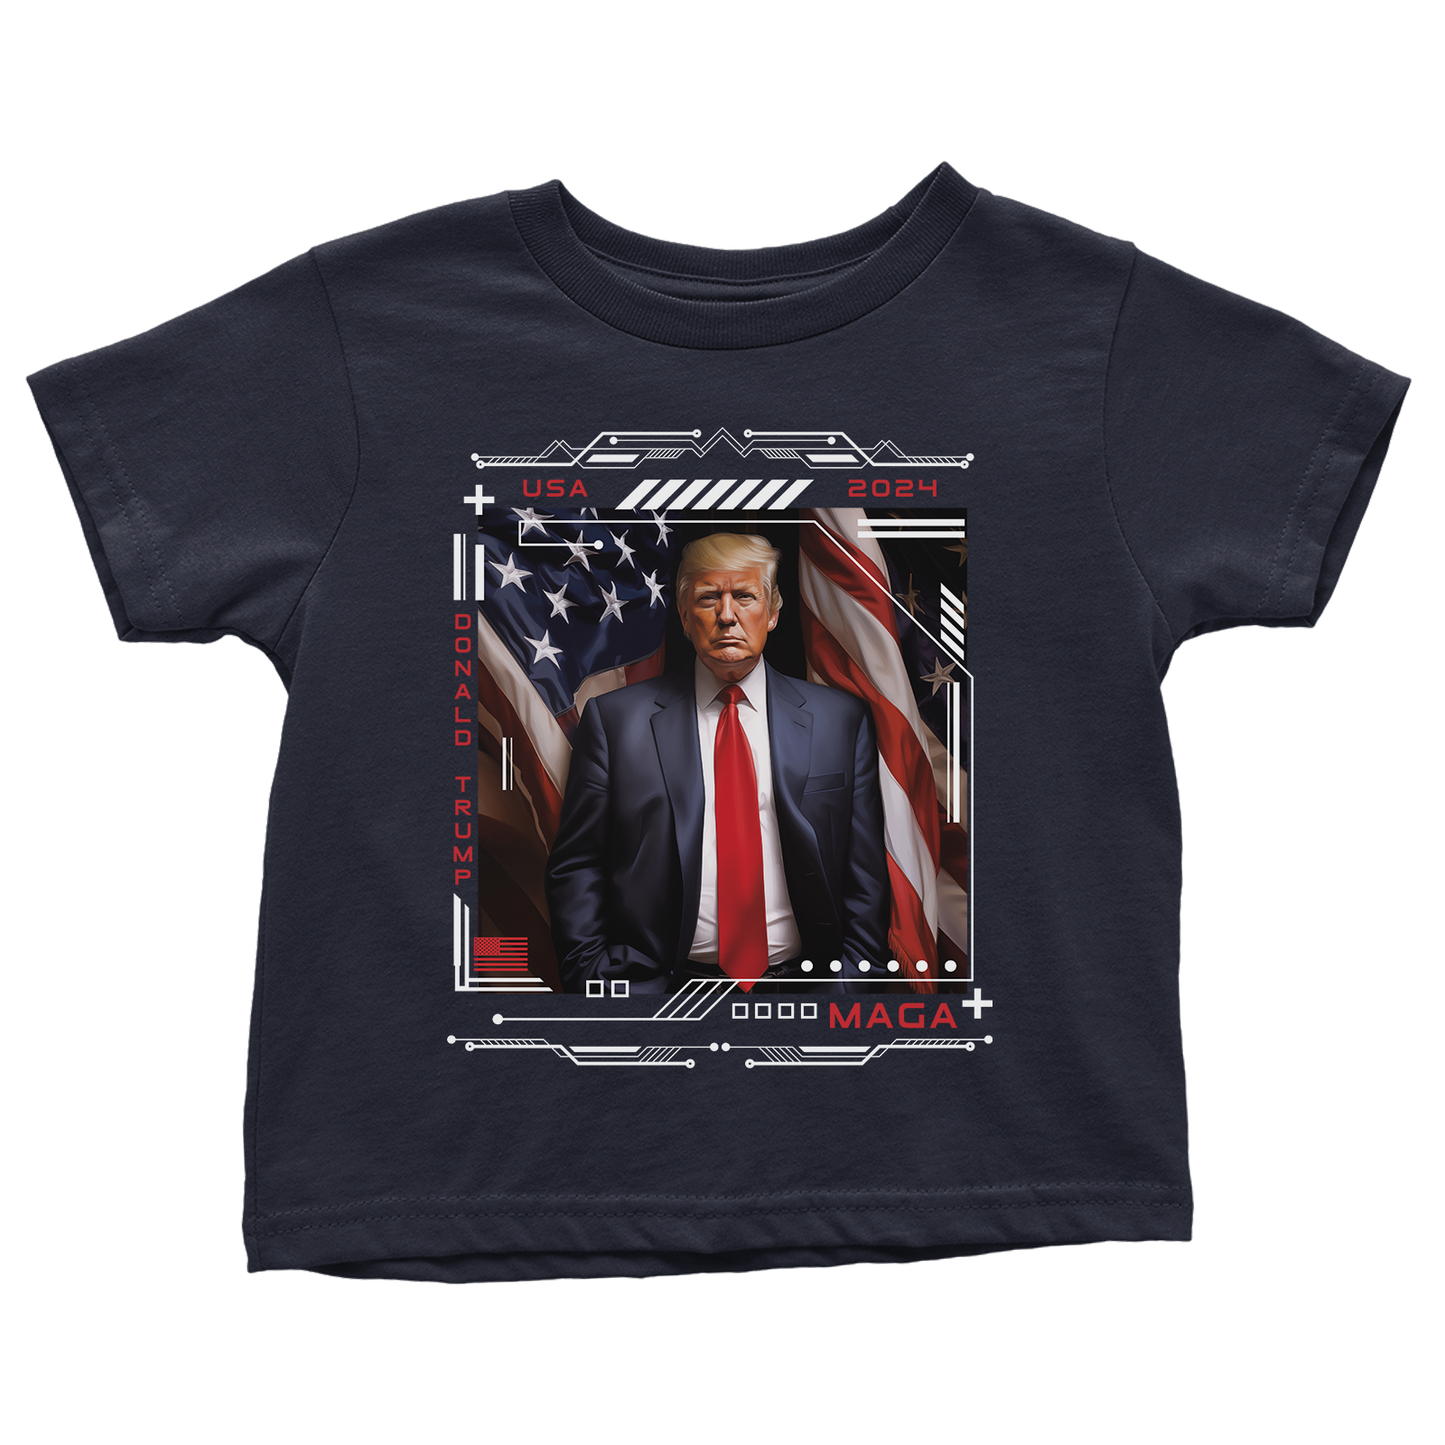 USA Trump 2024 (Toddlers)